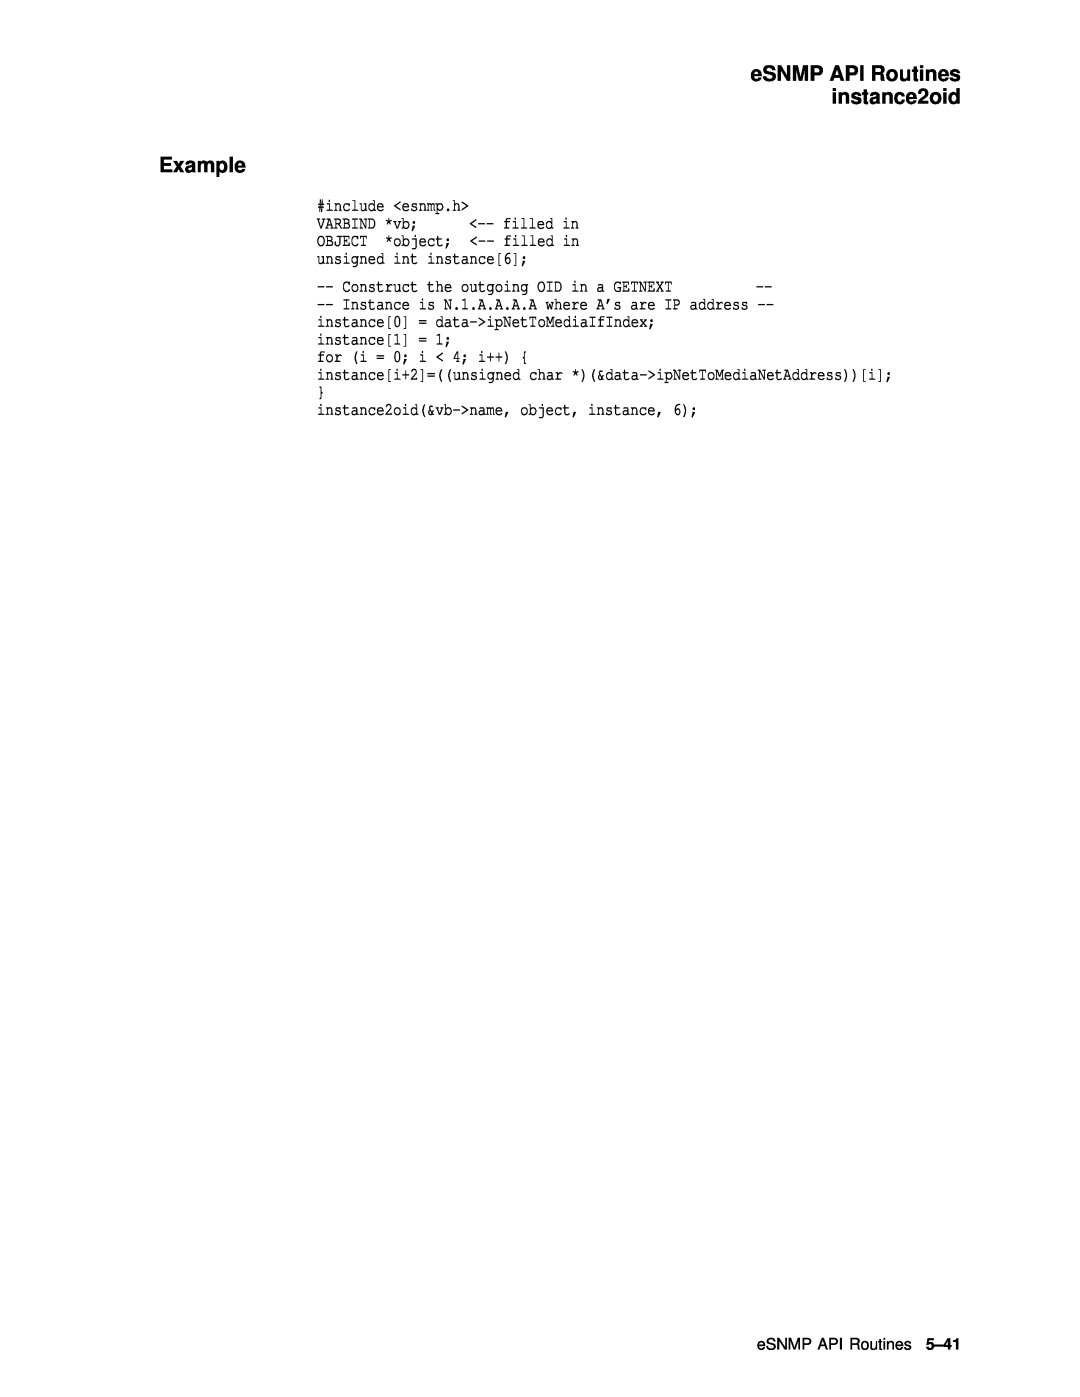 Compaq AAR04BCTE manual eSNMP API Routines instance2oid Example 